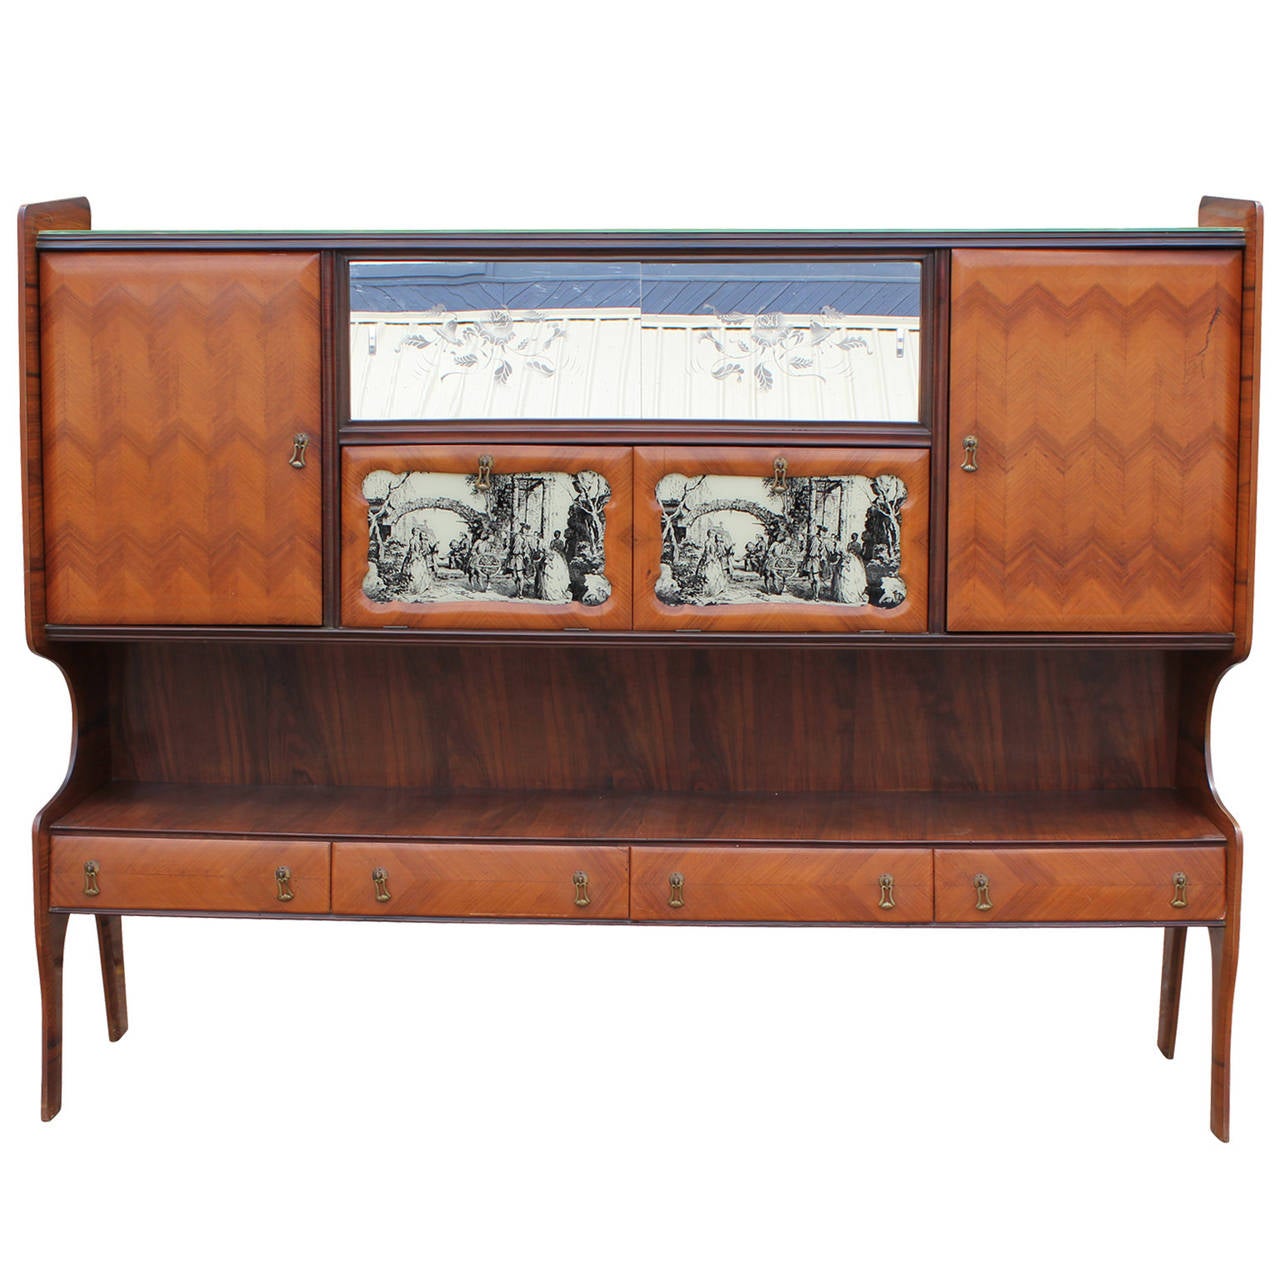 Incredible sculptural Italian dry bar. Bar is veneered in a chevron pattern on the front and a dramatic rosewood Veneer on the sides. Side pieces are very dimensional in appearance. Doors on right and left open to reveal a single glass shelf. Etched